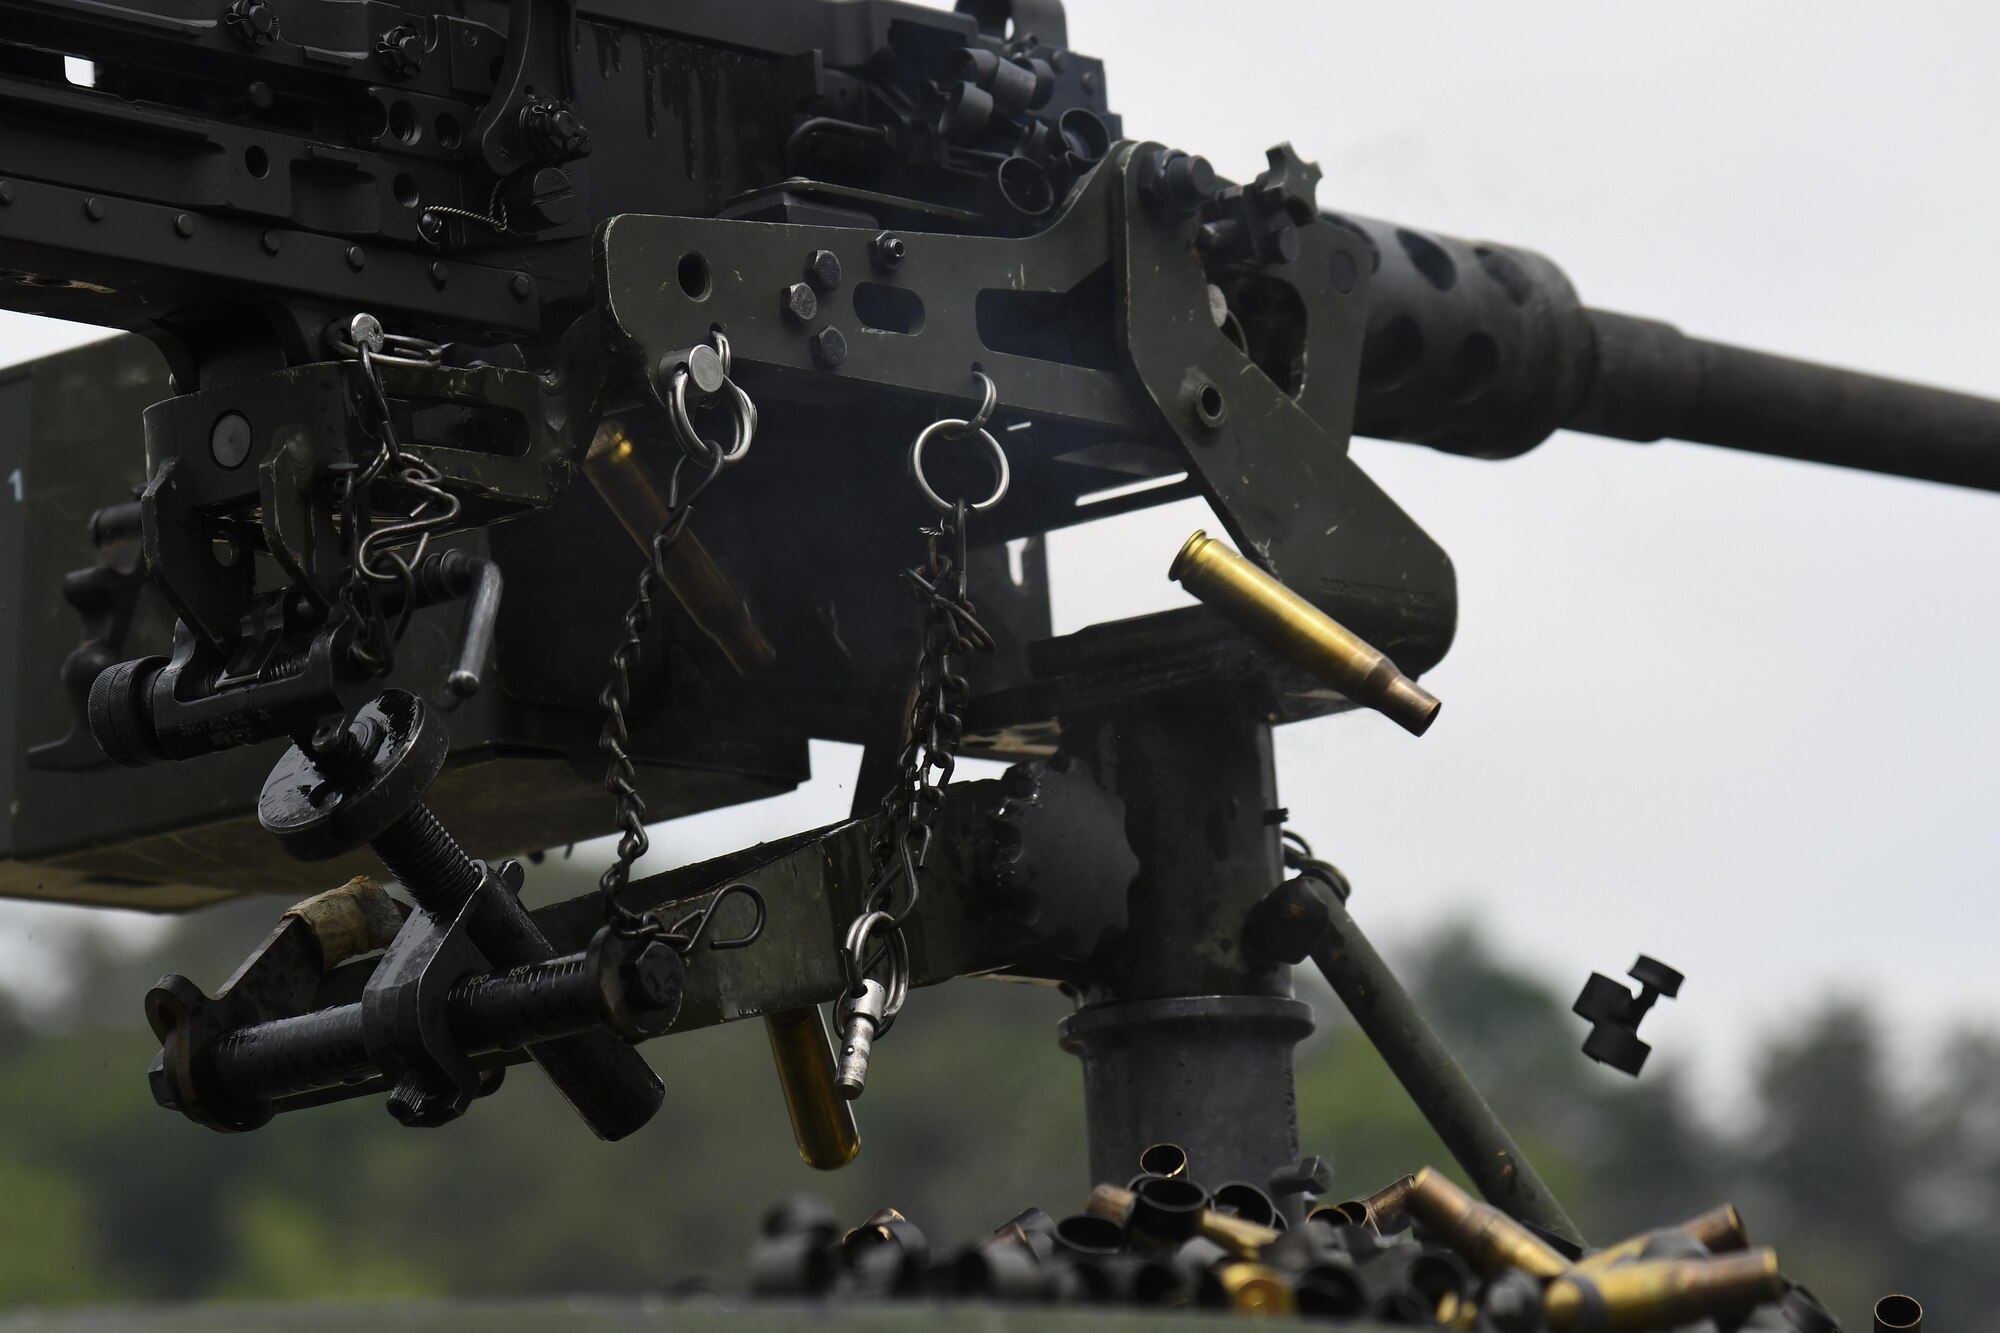 Casings from a M2 machine gun are released during weapons firing at Camp Rodriguez, Republic of Korea, May 23, 2017. This training ensures that defenders are vigilant and ready to ‘Fight Tonight.’ (U.S. Air Force photo by Airman 1st Class Gwendalyn Smith)